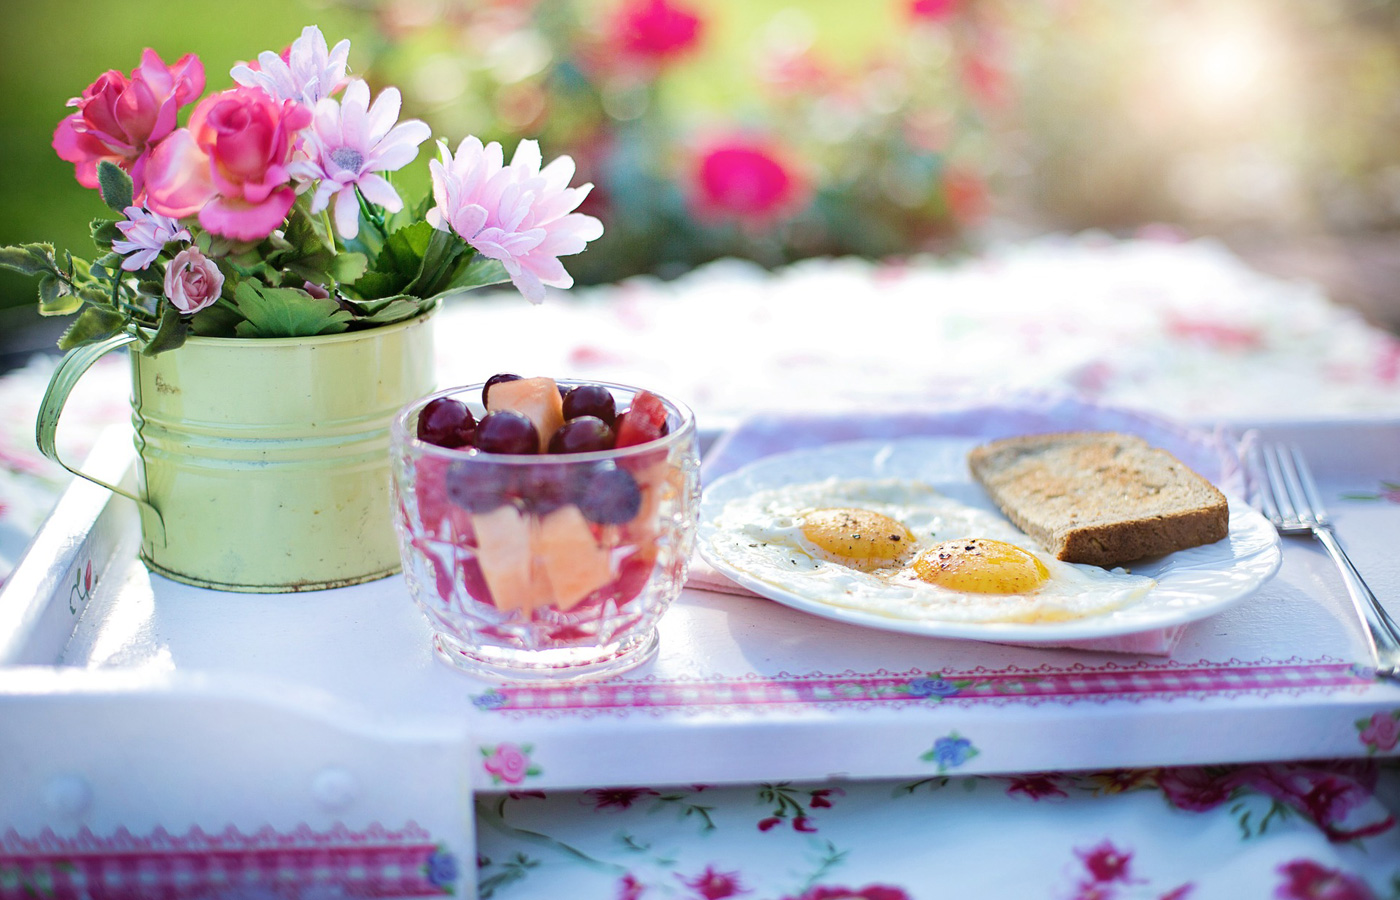 Breakfast and Flowers